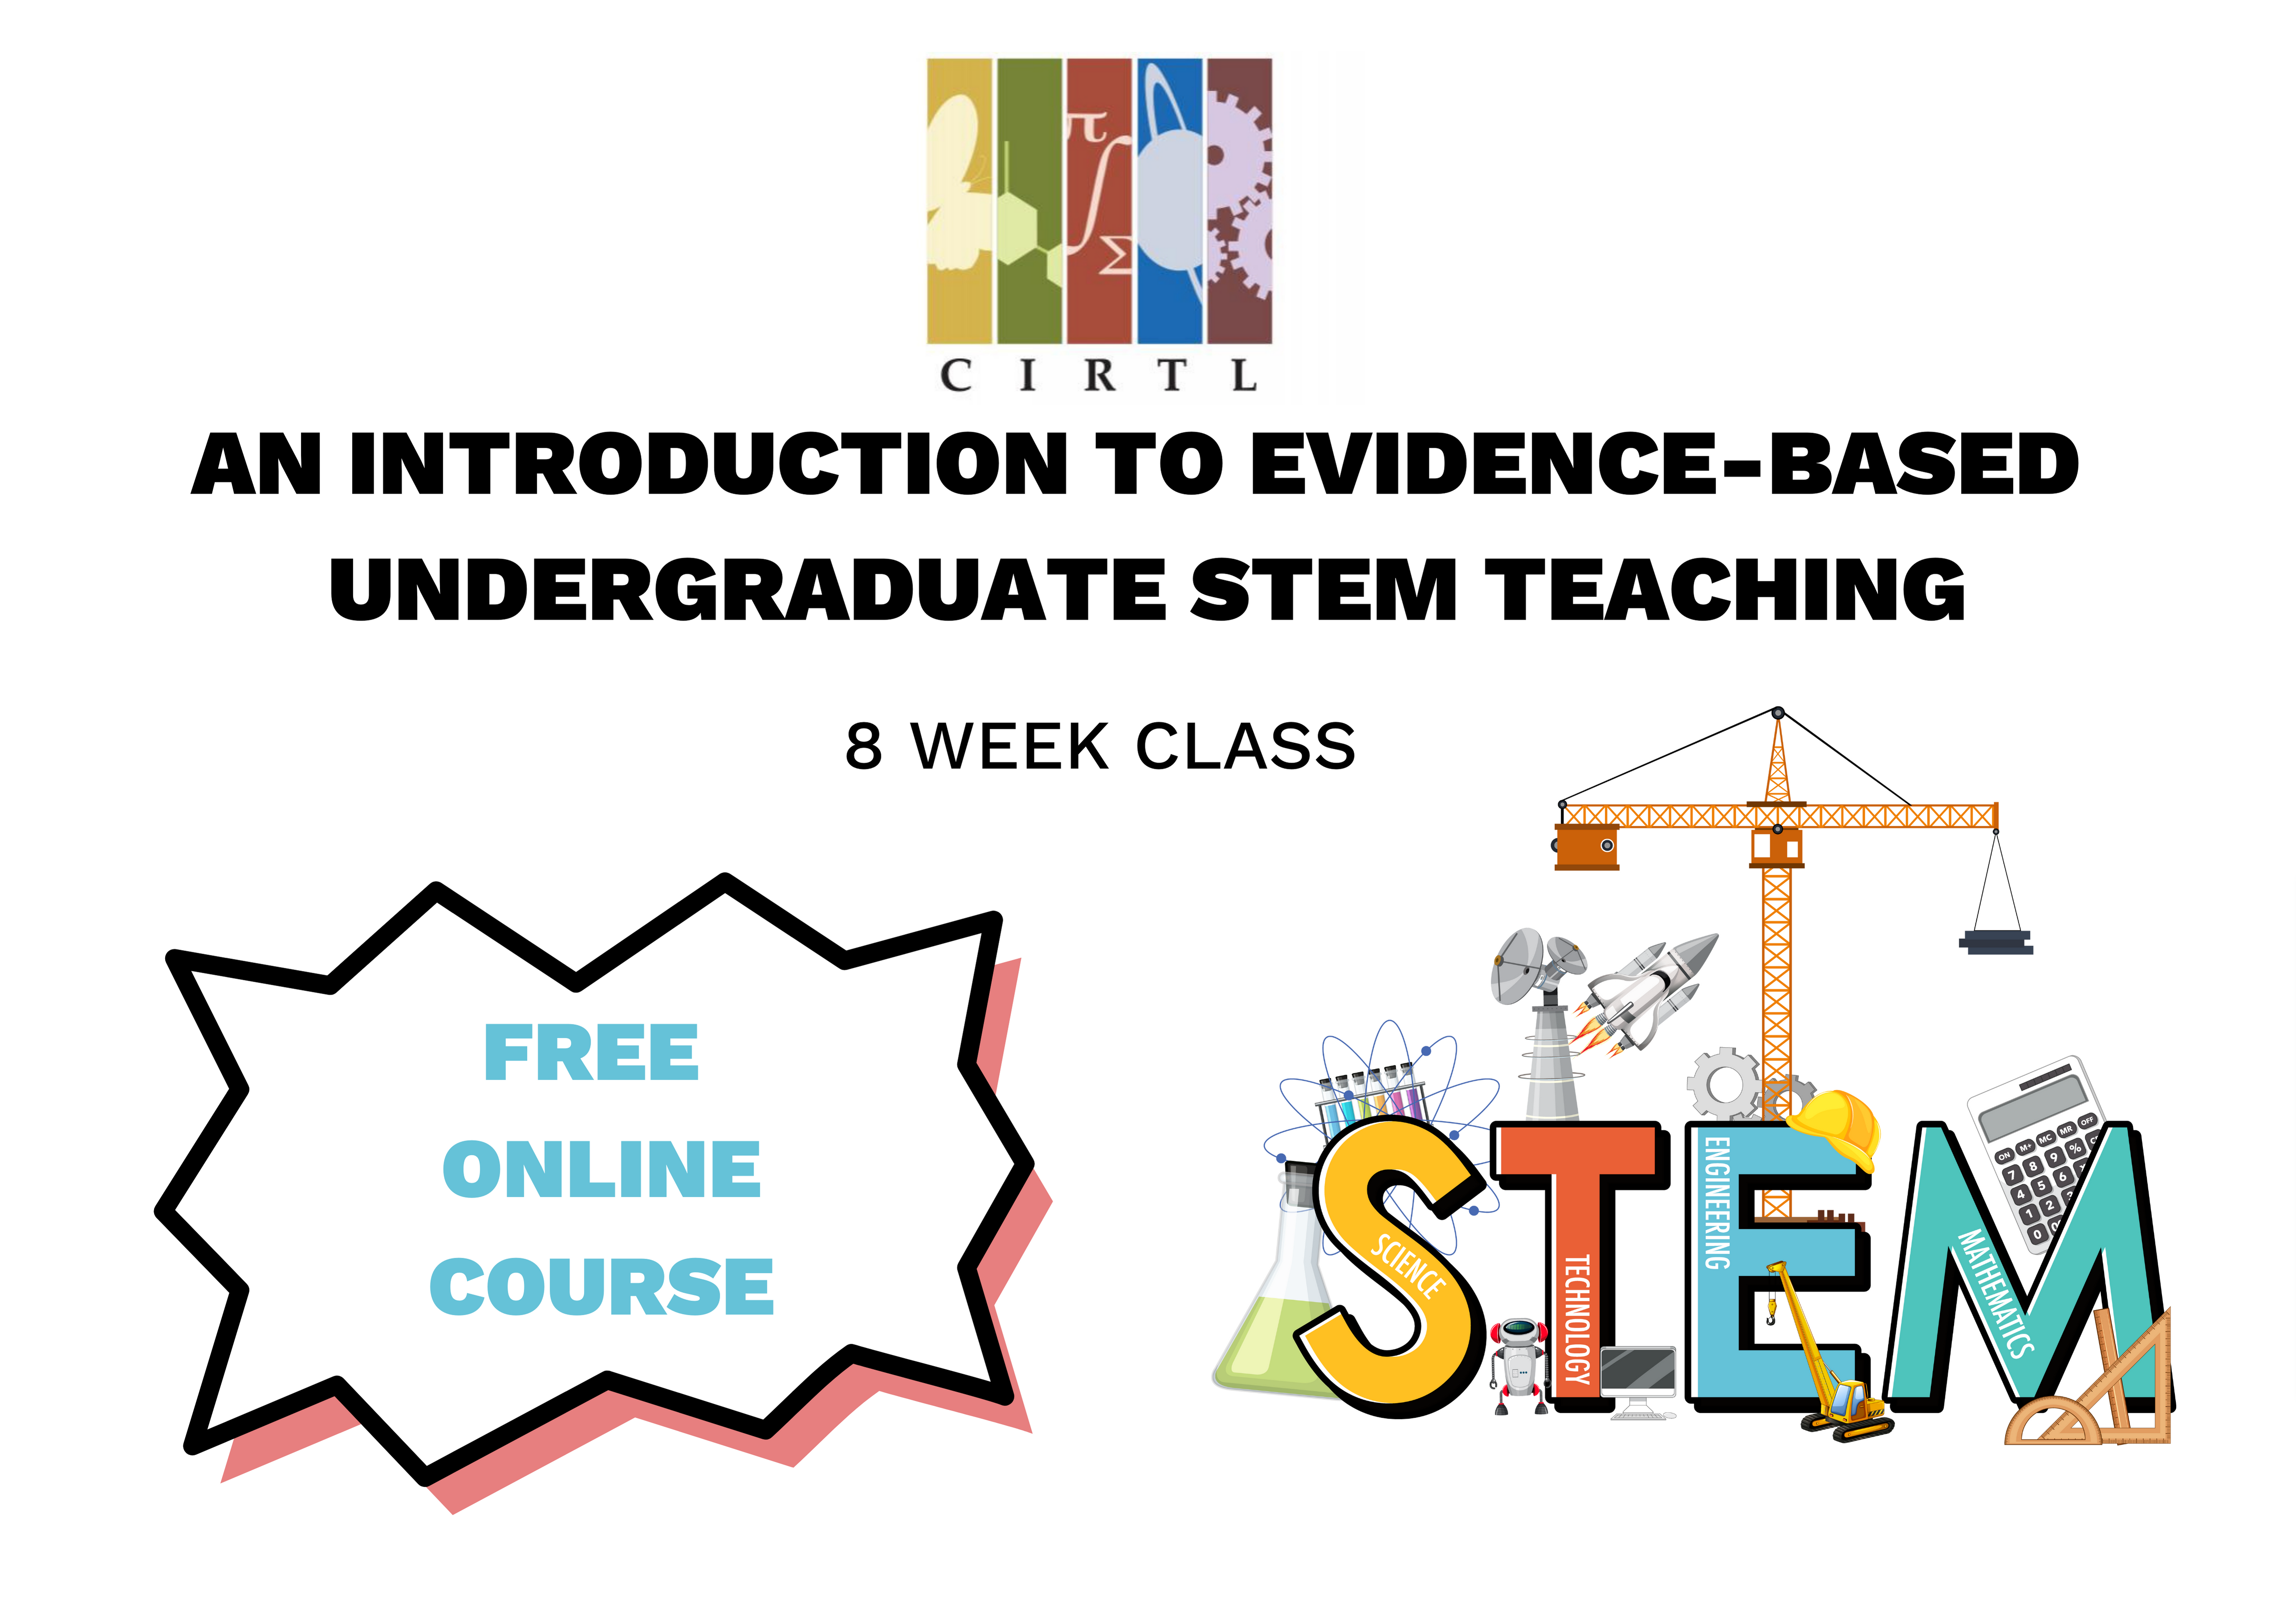 Sign up now to join the CIRTL MOOC on Evidence-Based STEM Teaching!